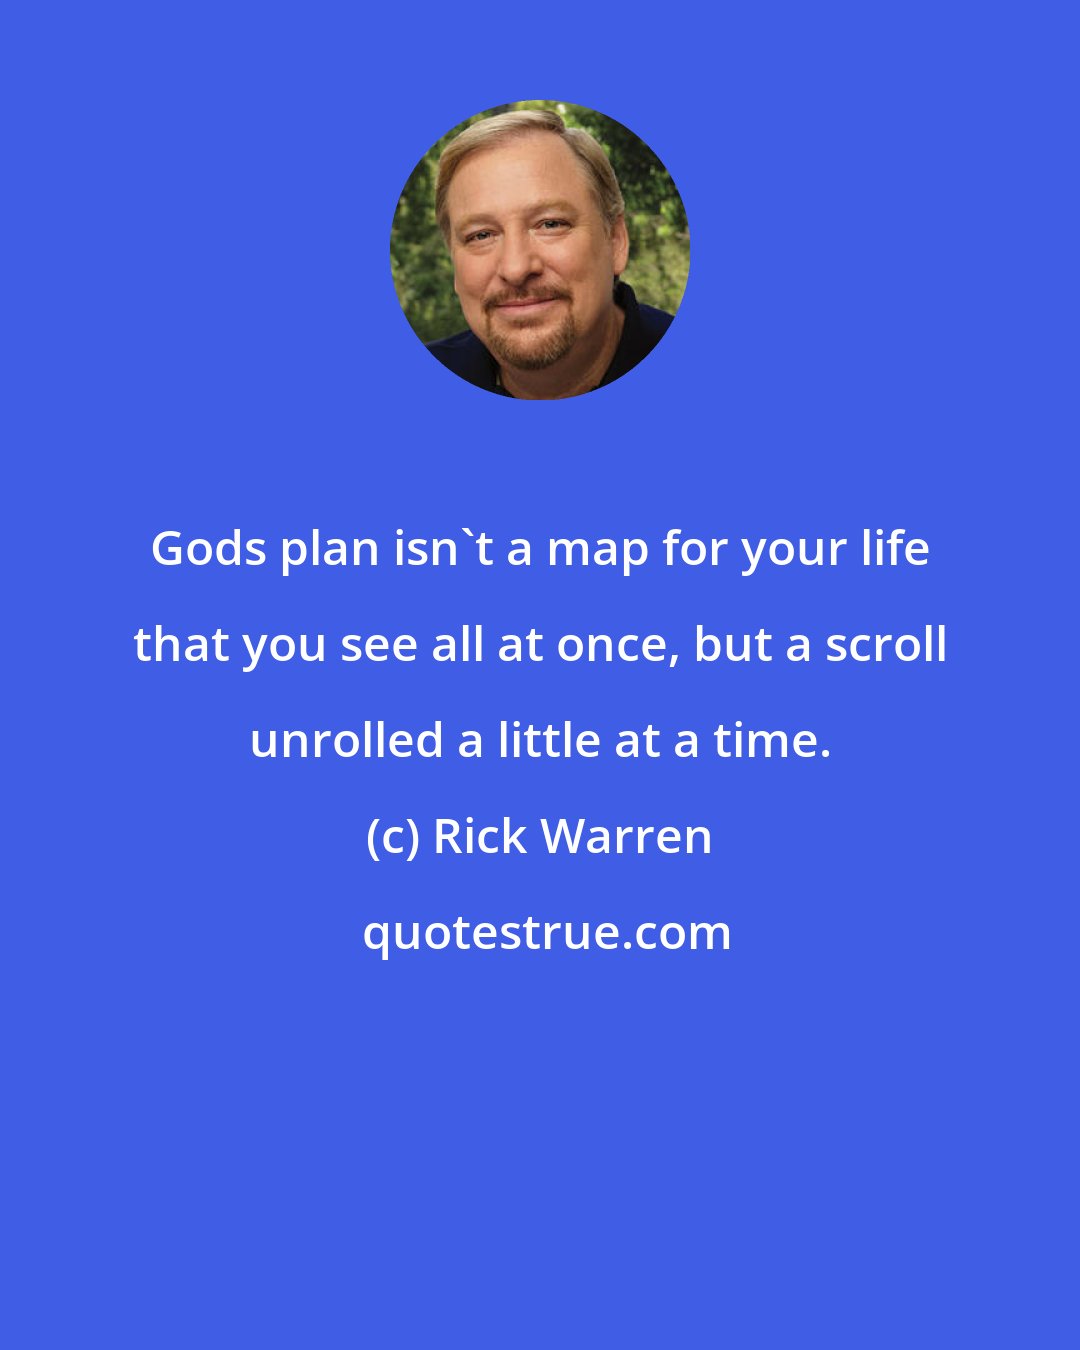 Rick Warren: Gods plan isn't a map for your life that you see all at once, but a scroll unrolled a little at a time.